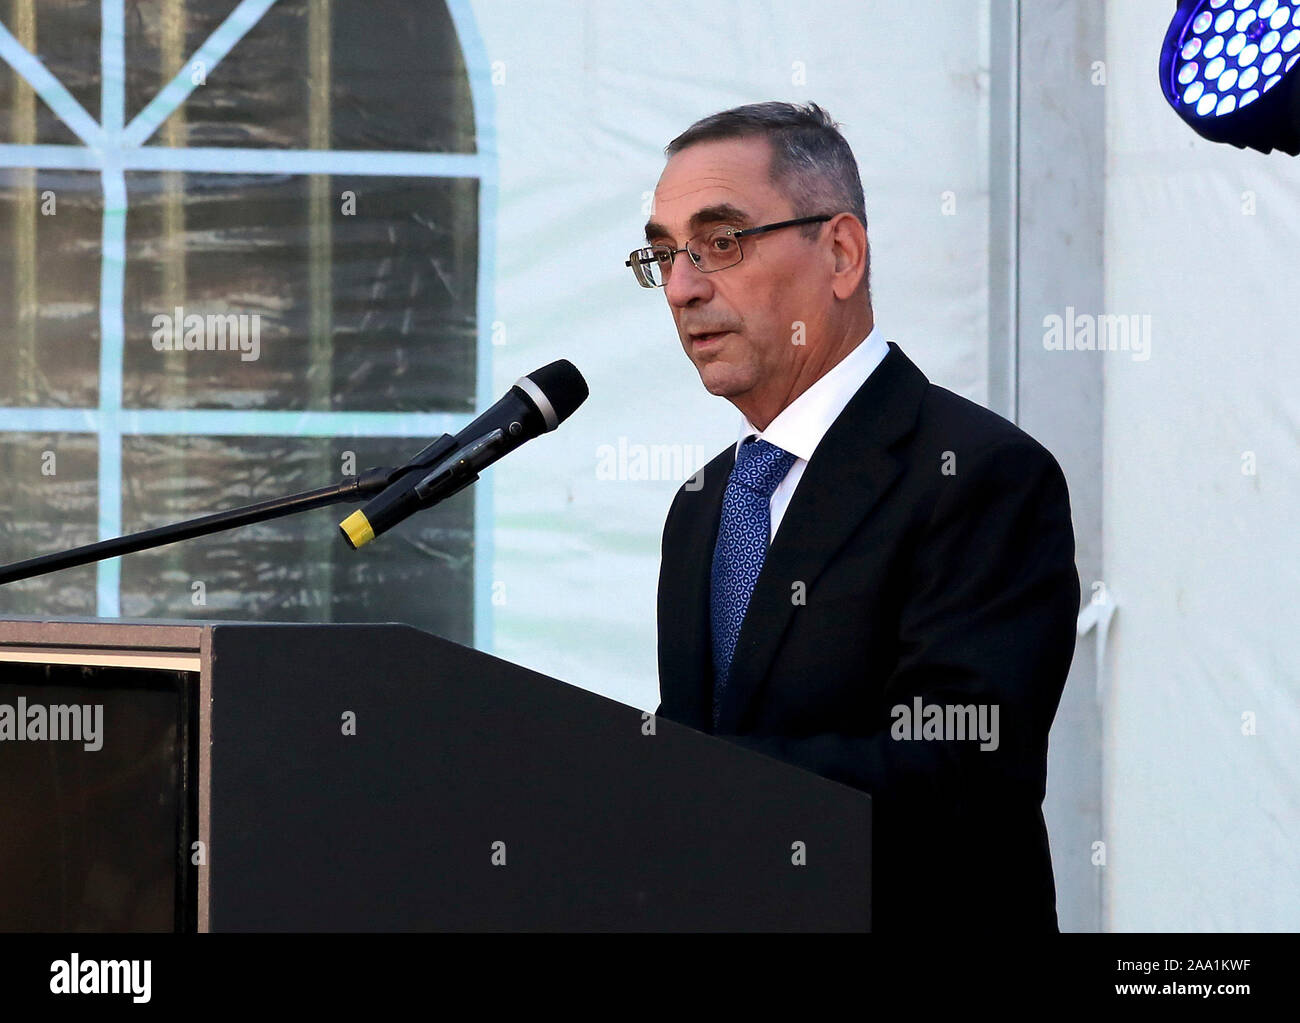 Ulcinj, Malta's Minister for Energy and Water Management. 18th Nov, 2019. Joe Mizzi, Malta's Minister for Energy and Water Management, gives a speech at the inauguration ceremony of the Mozura Wind Park in southern Montenegro on Nov. 18, 2019. The Mozura Wind Park in southern Montenegro, constructed by a consortium of the Shanghai Electric Power Company (SEP) and Malta state energy provider Enemalta, was inaugurated Monday. Credit: Shi Zhongyu/Xinhua/Alamy Live News Stock Photo